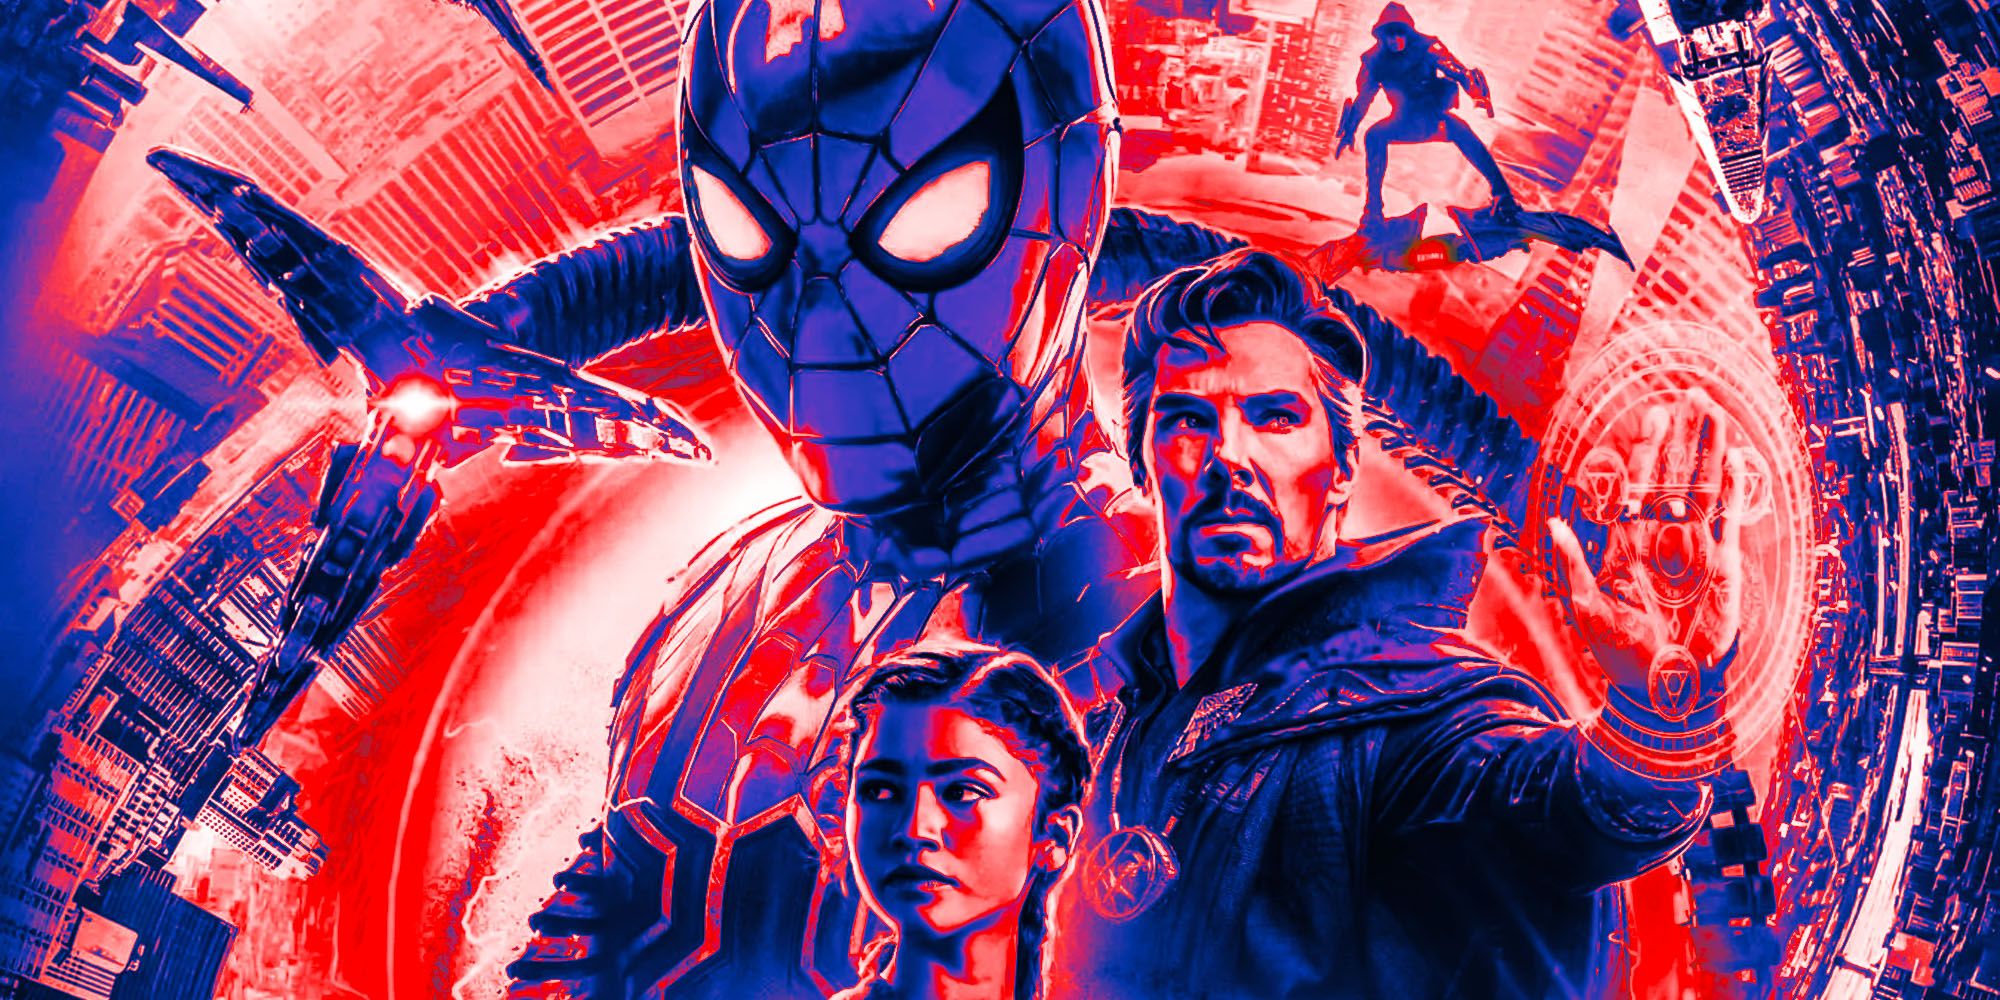 Spider-Man: No Way Home: Strange blunders, Spider-splicing and sizzling  supervillains – discuss with spoilers, Spider-Man: No Way Home